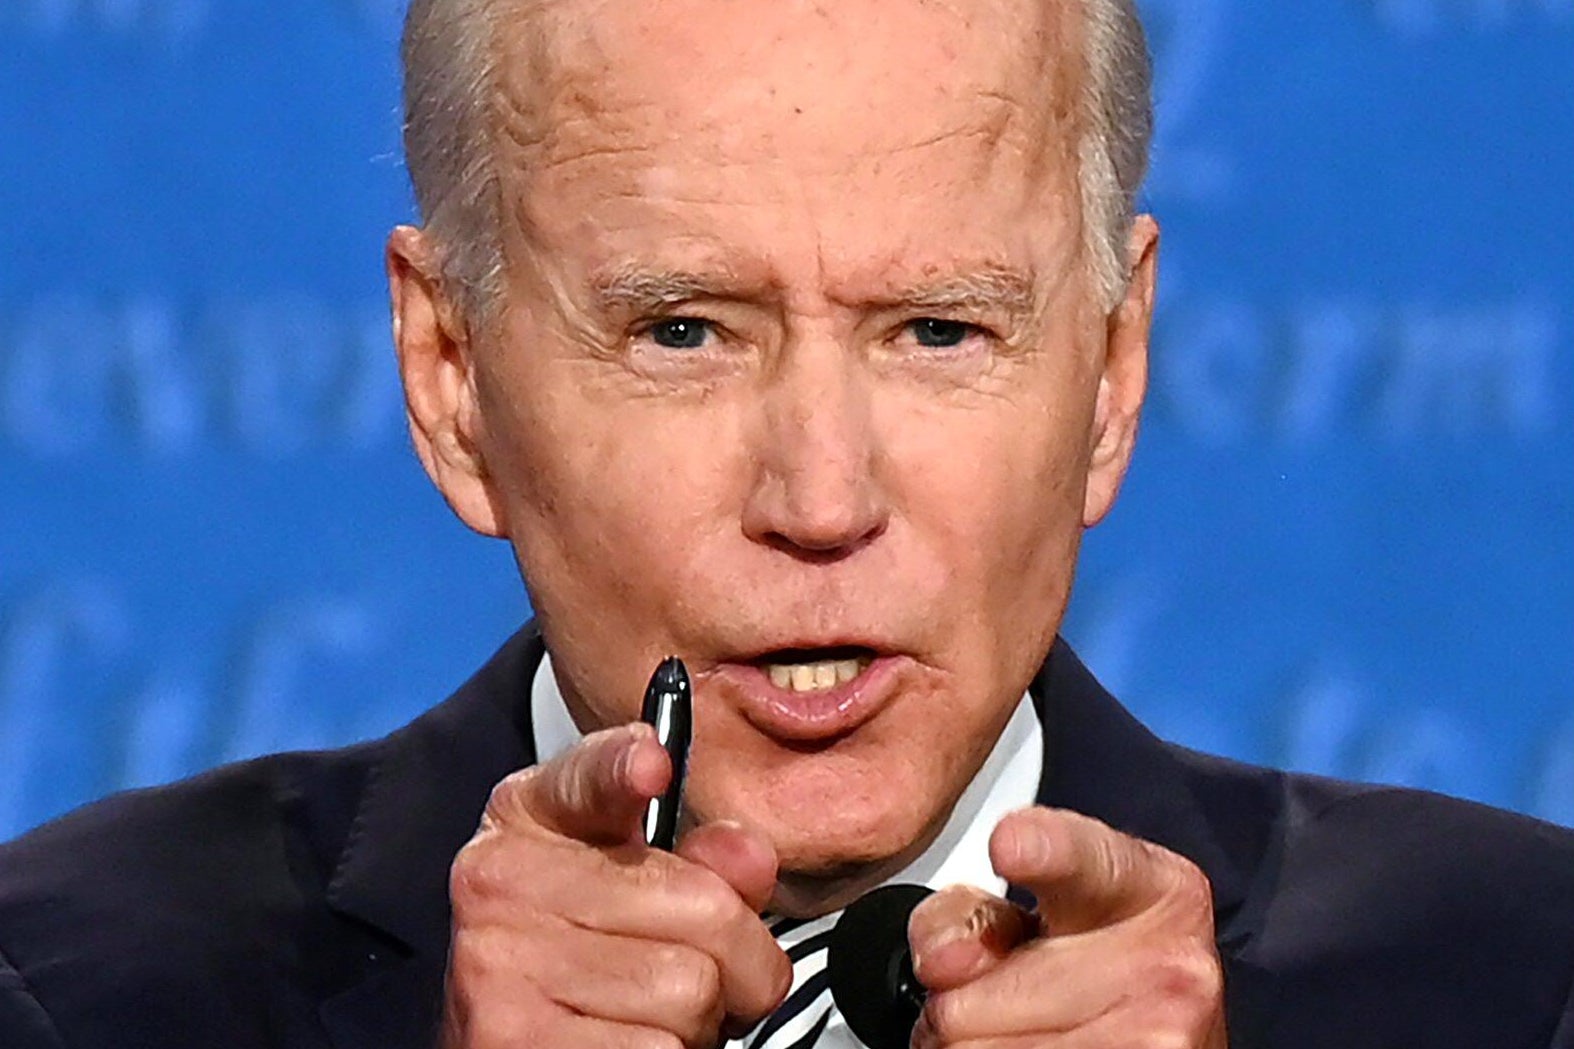 Joe Biden pointing at the camera with two hands during the first presidential debate.